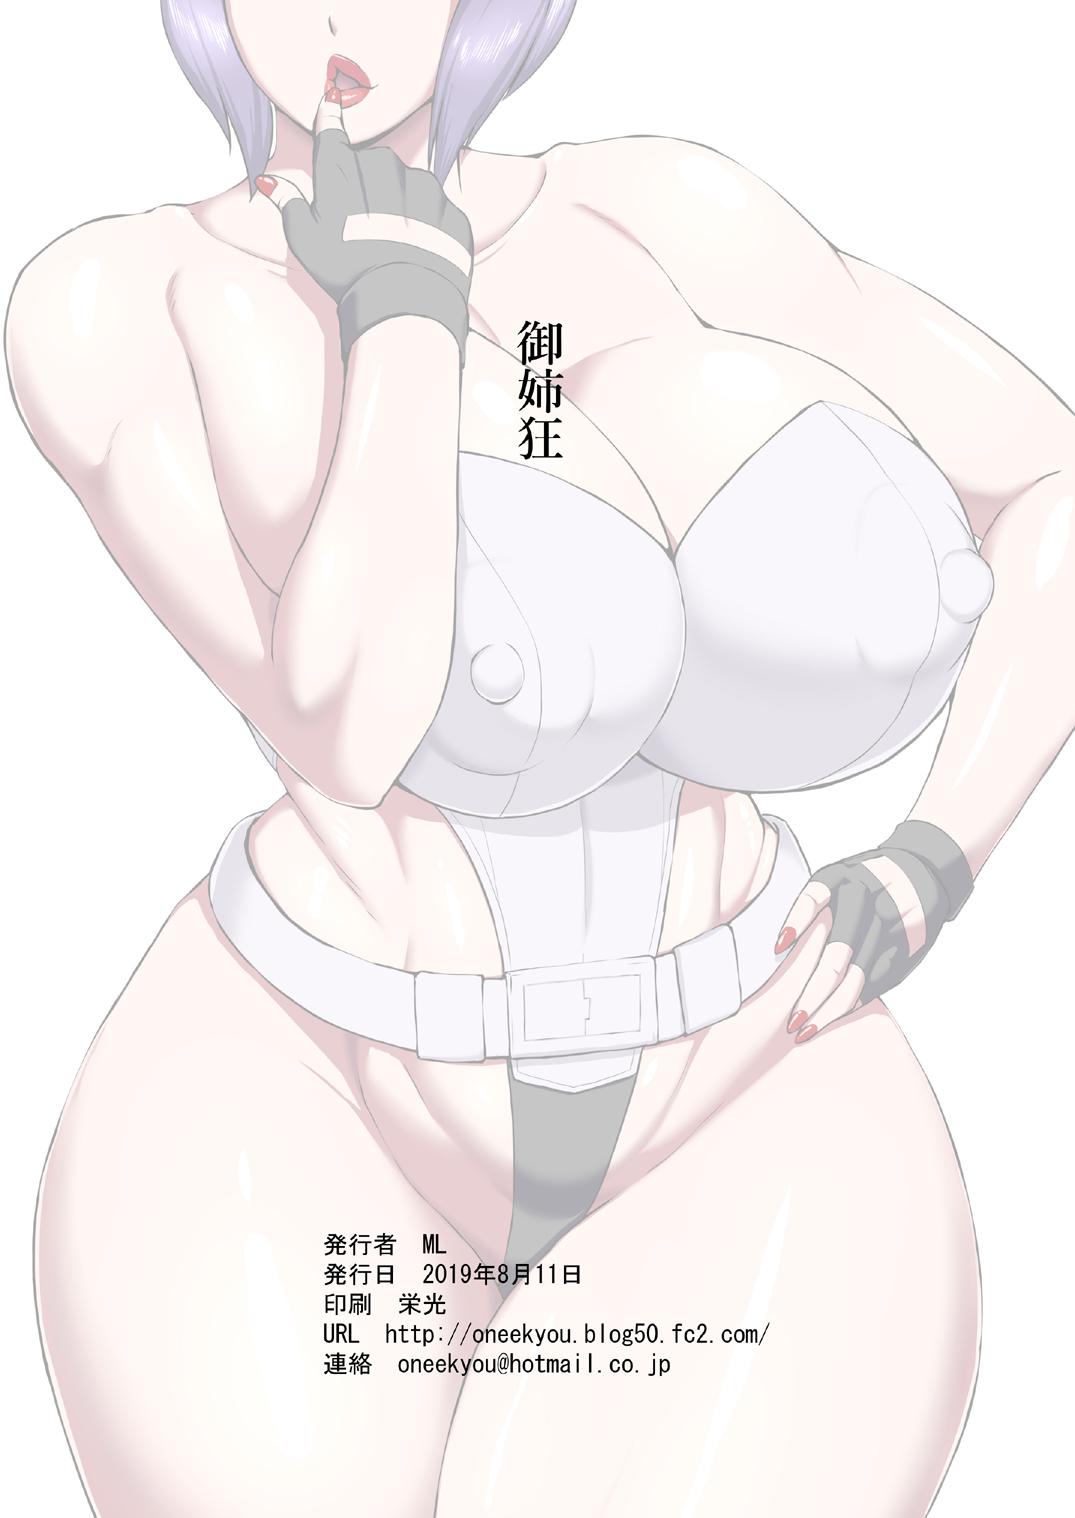 Gaygroupsex Shotagui Mesu Gorilla - Ghost in the shell Sex Toy - Page 2